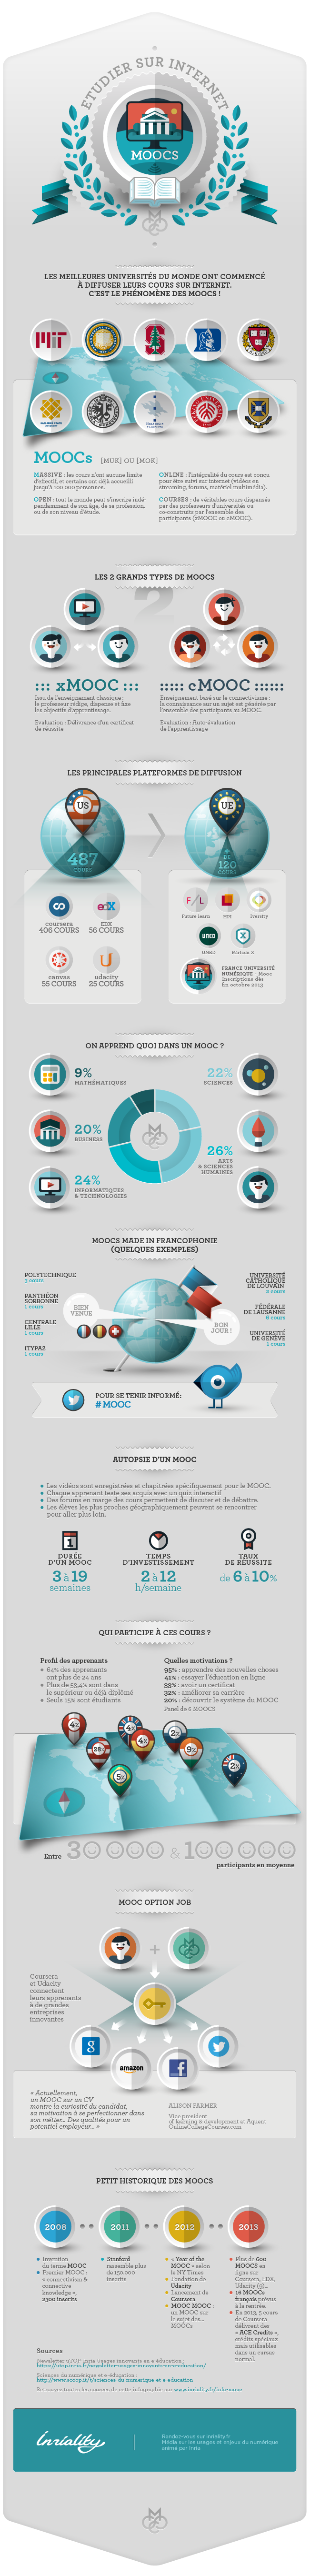 infographie_inriality_mooc